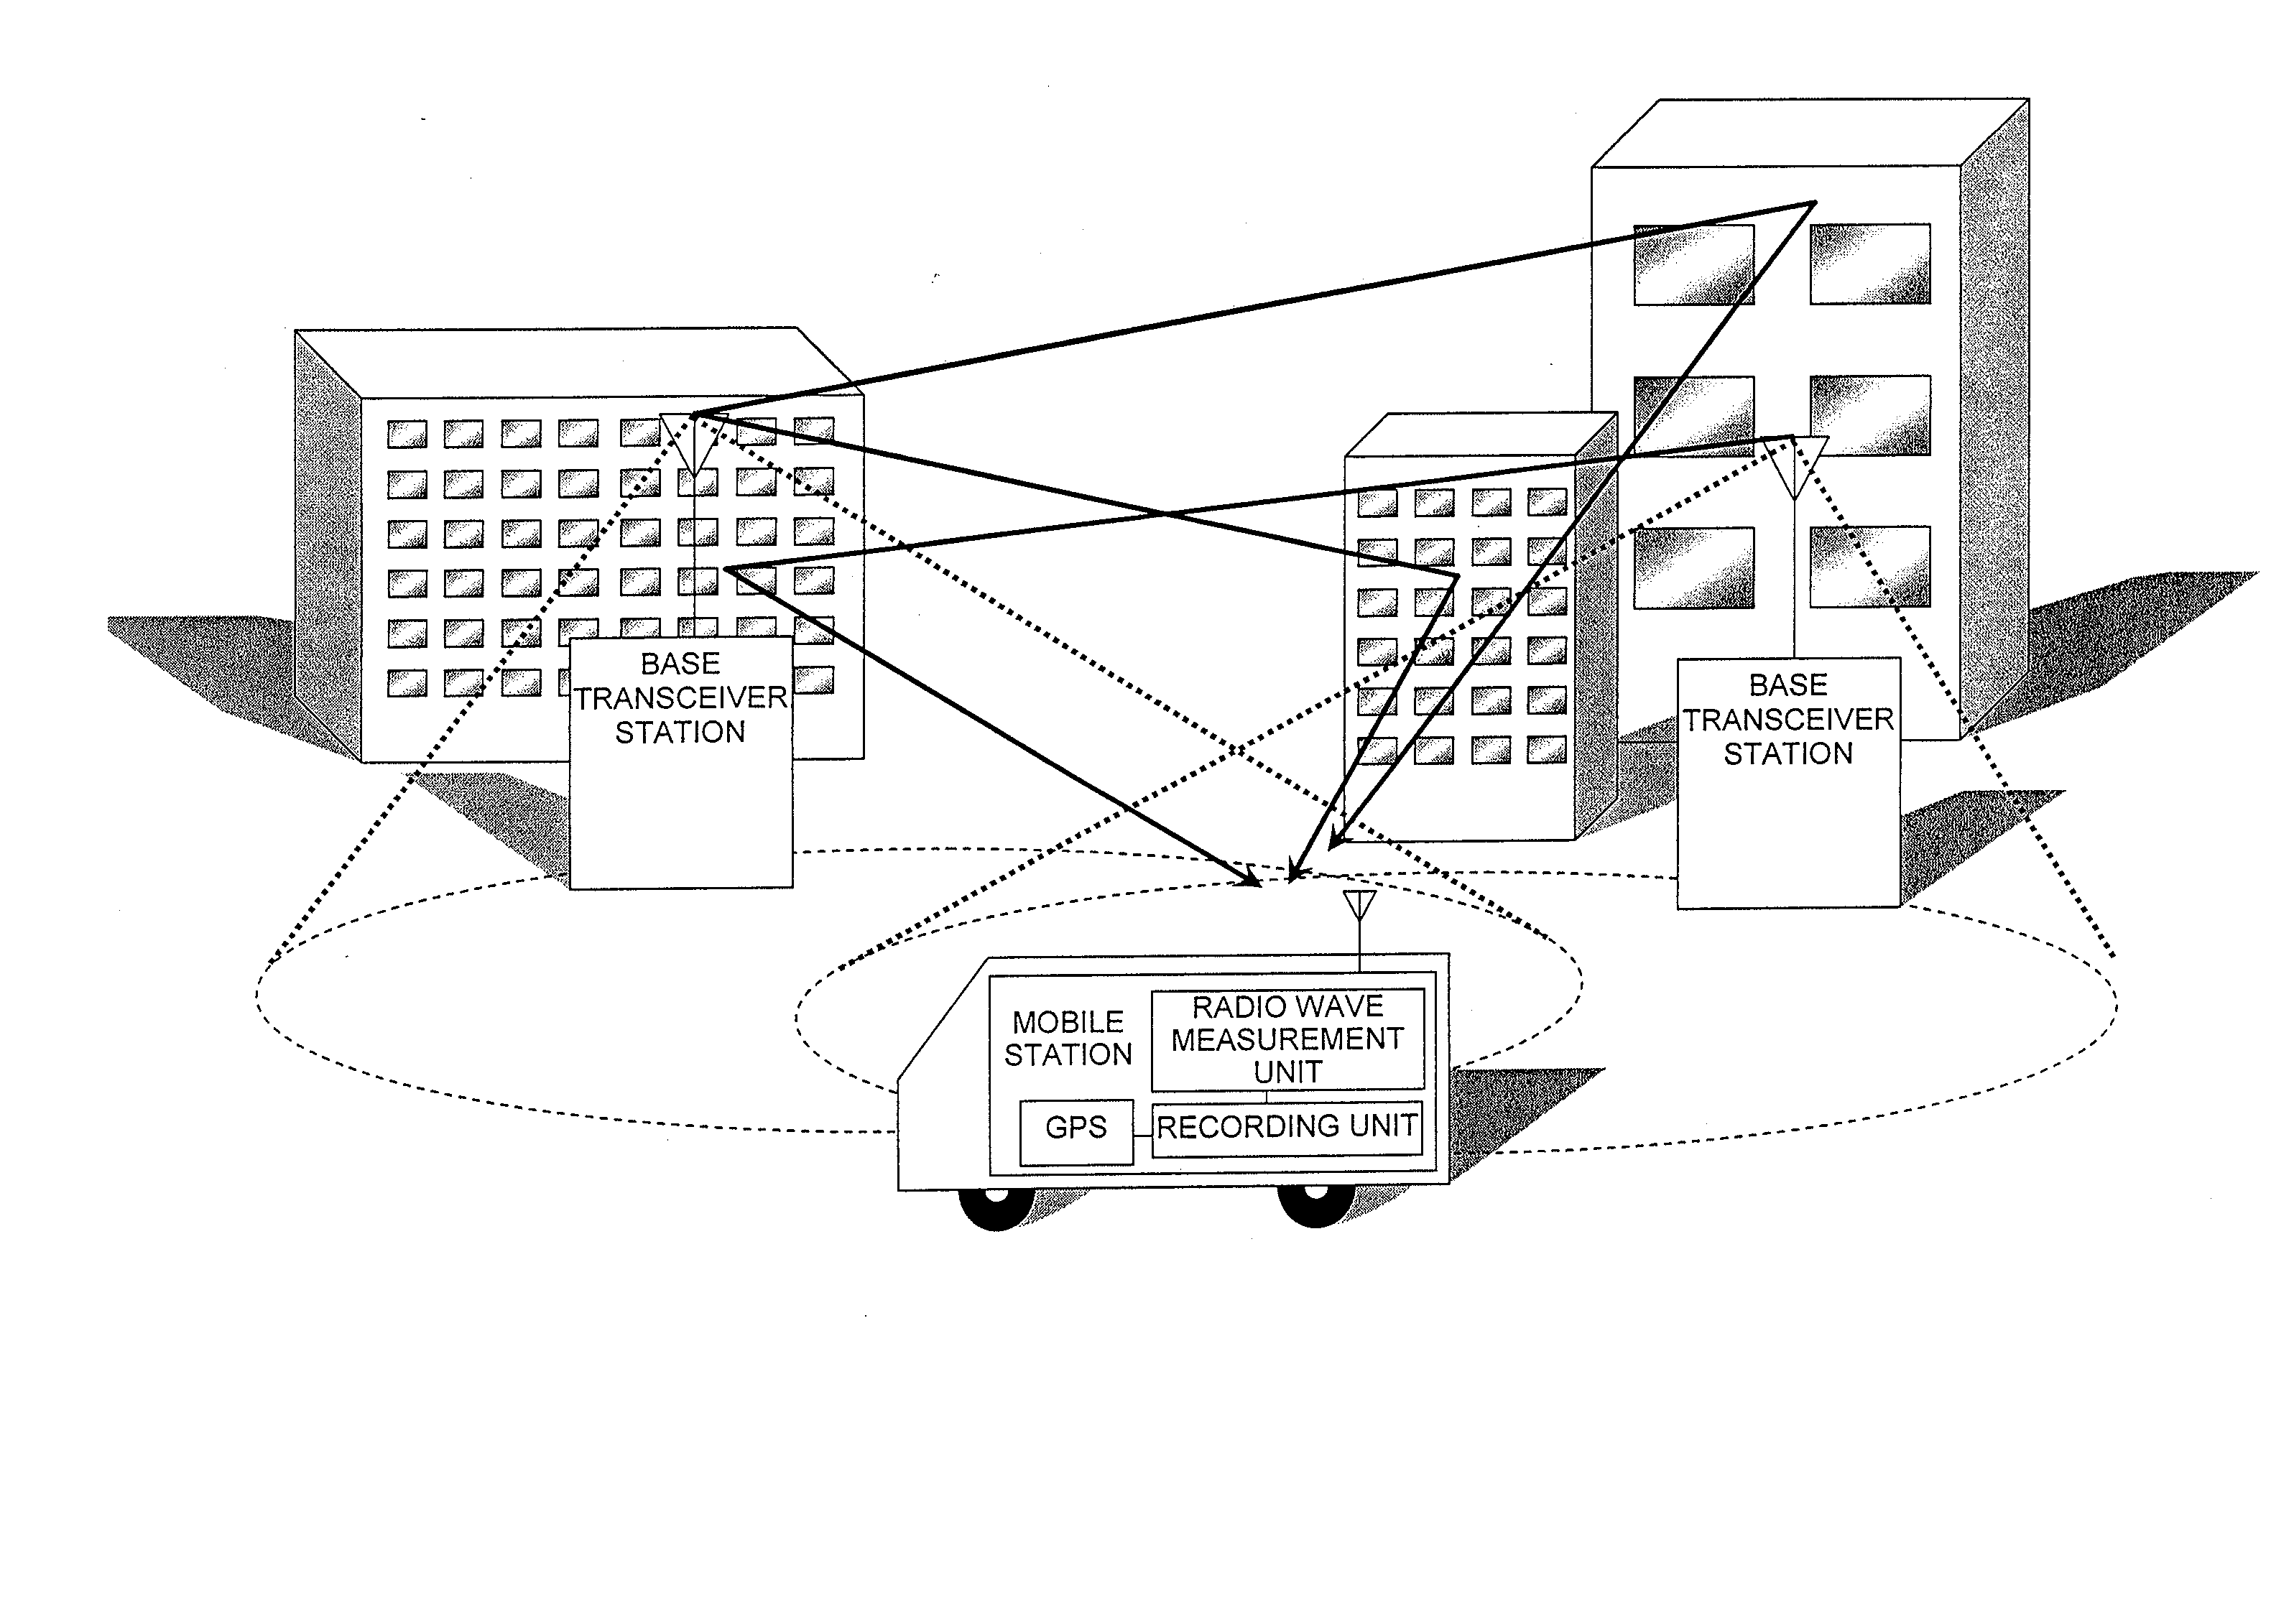 Radio Service Area Quality Information Acquisition System